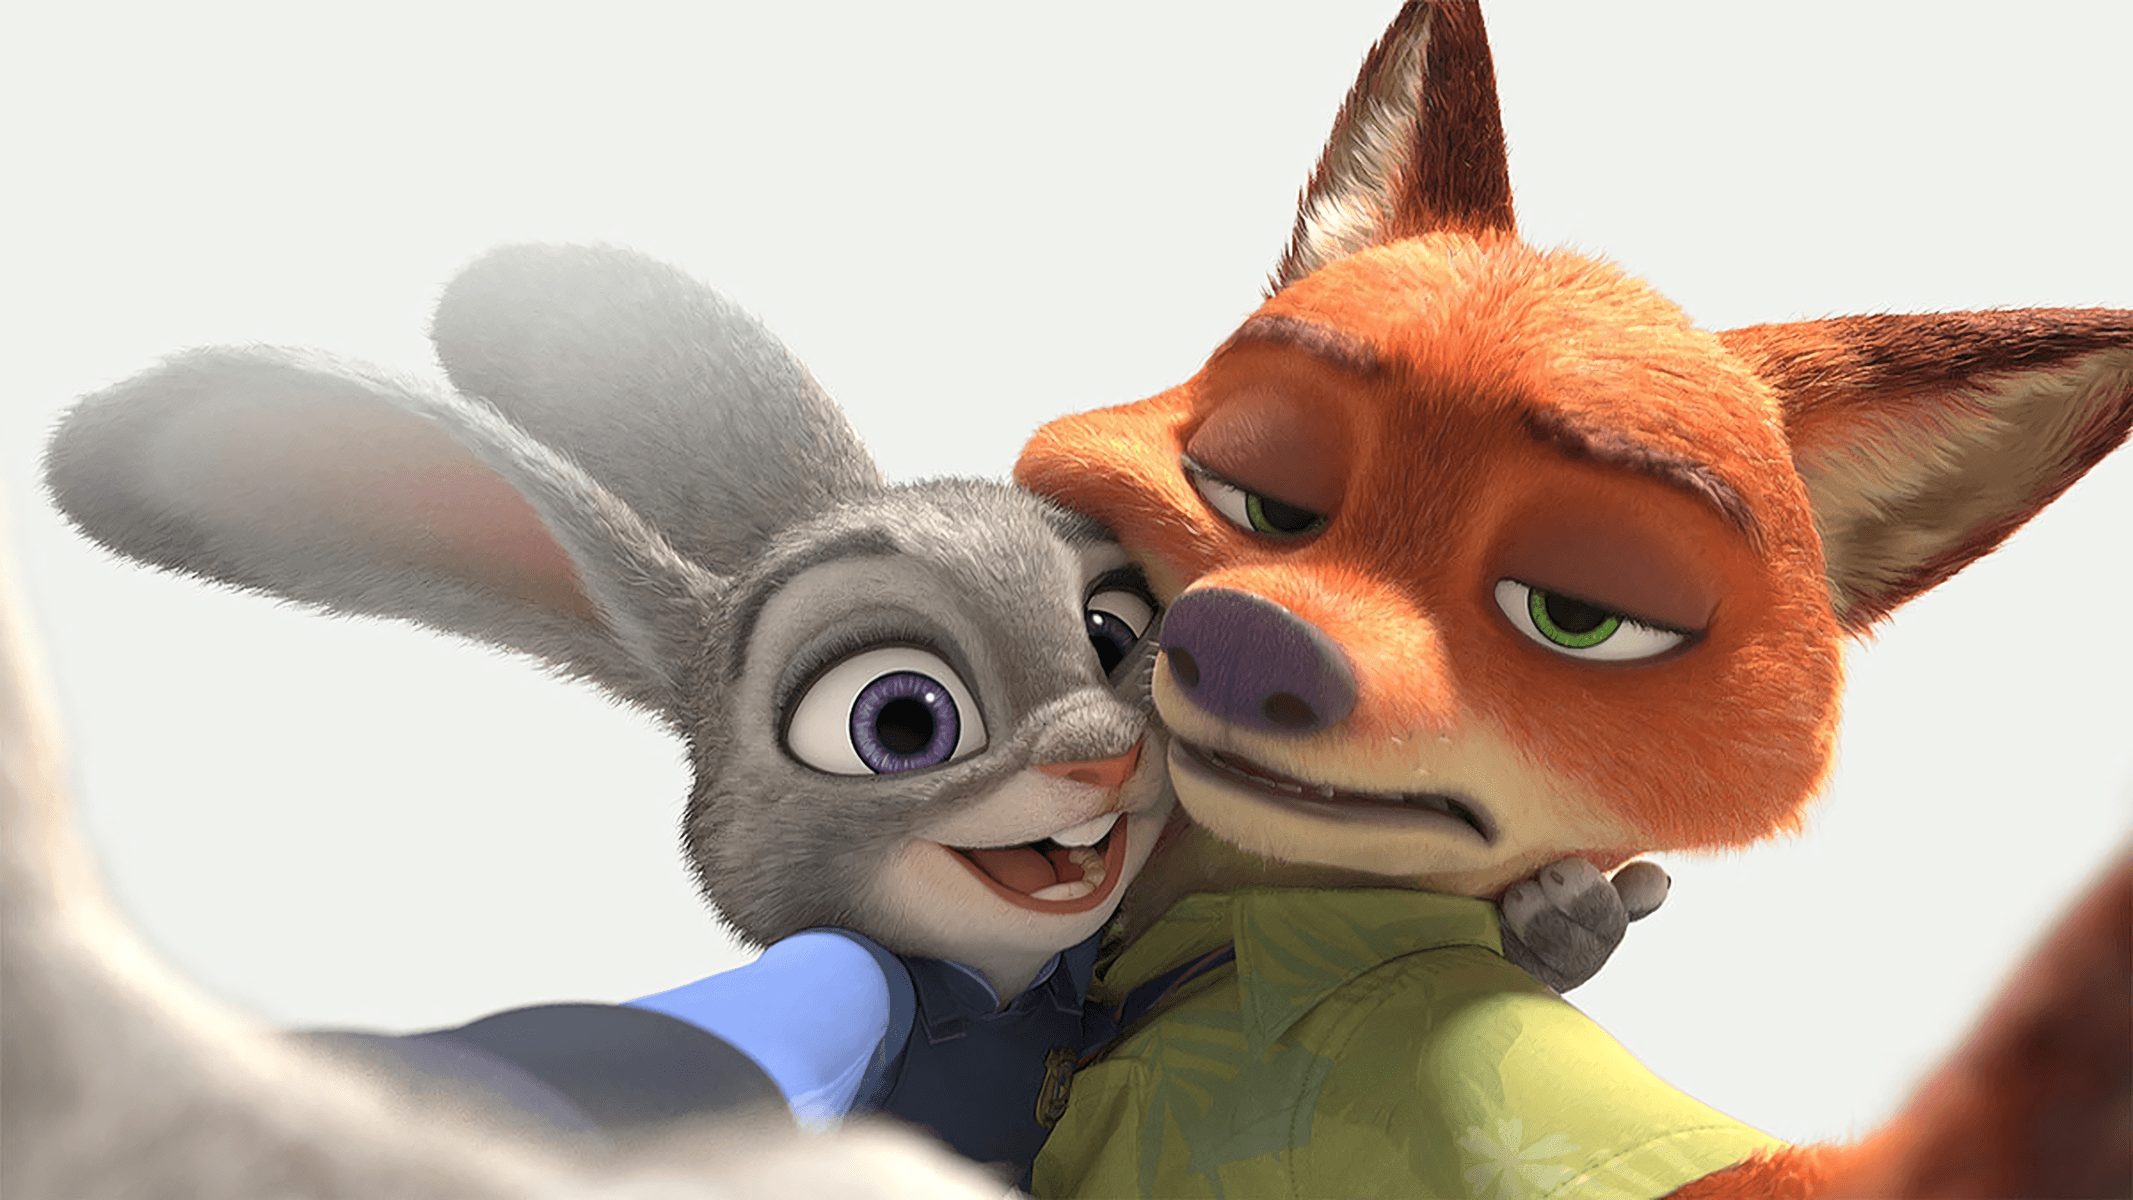 Zootopia download the new for ios